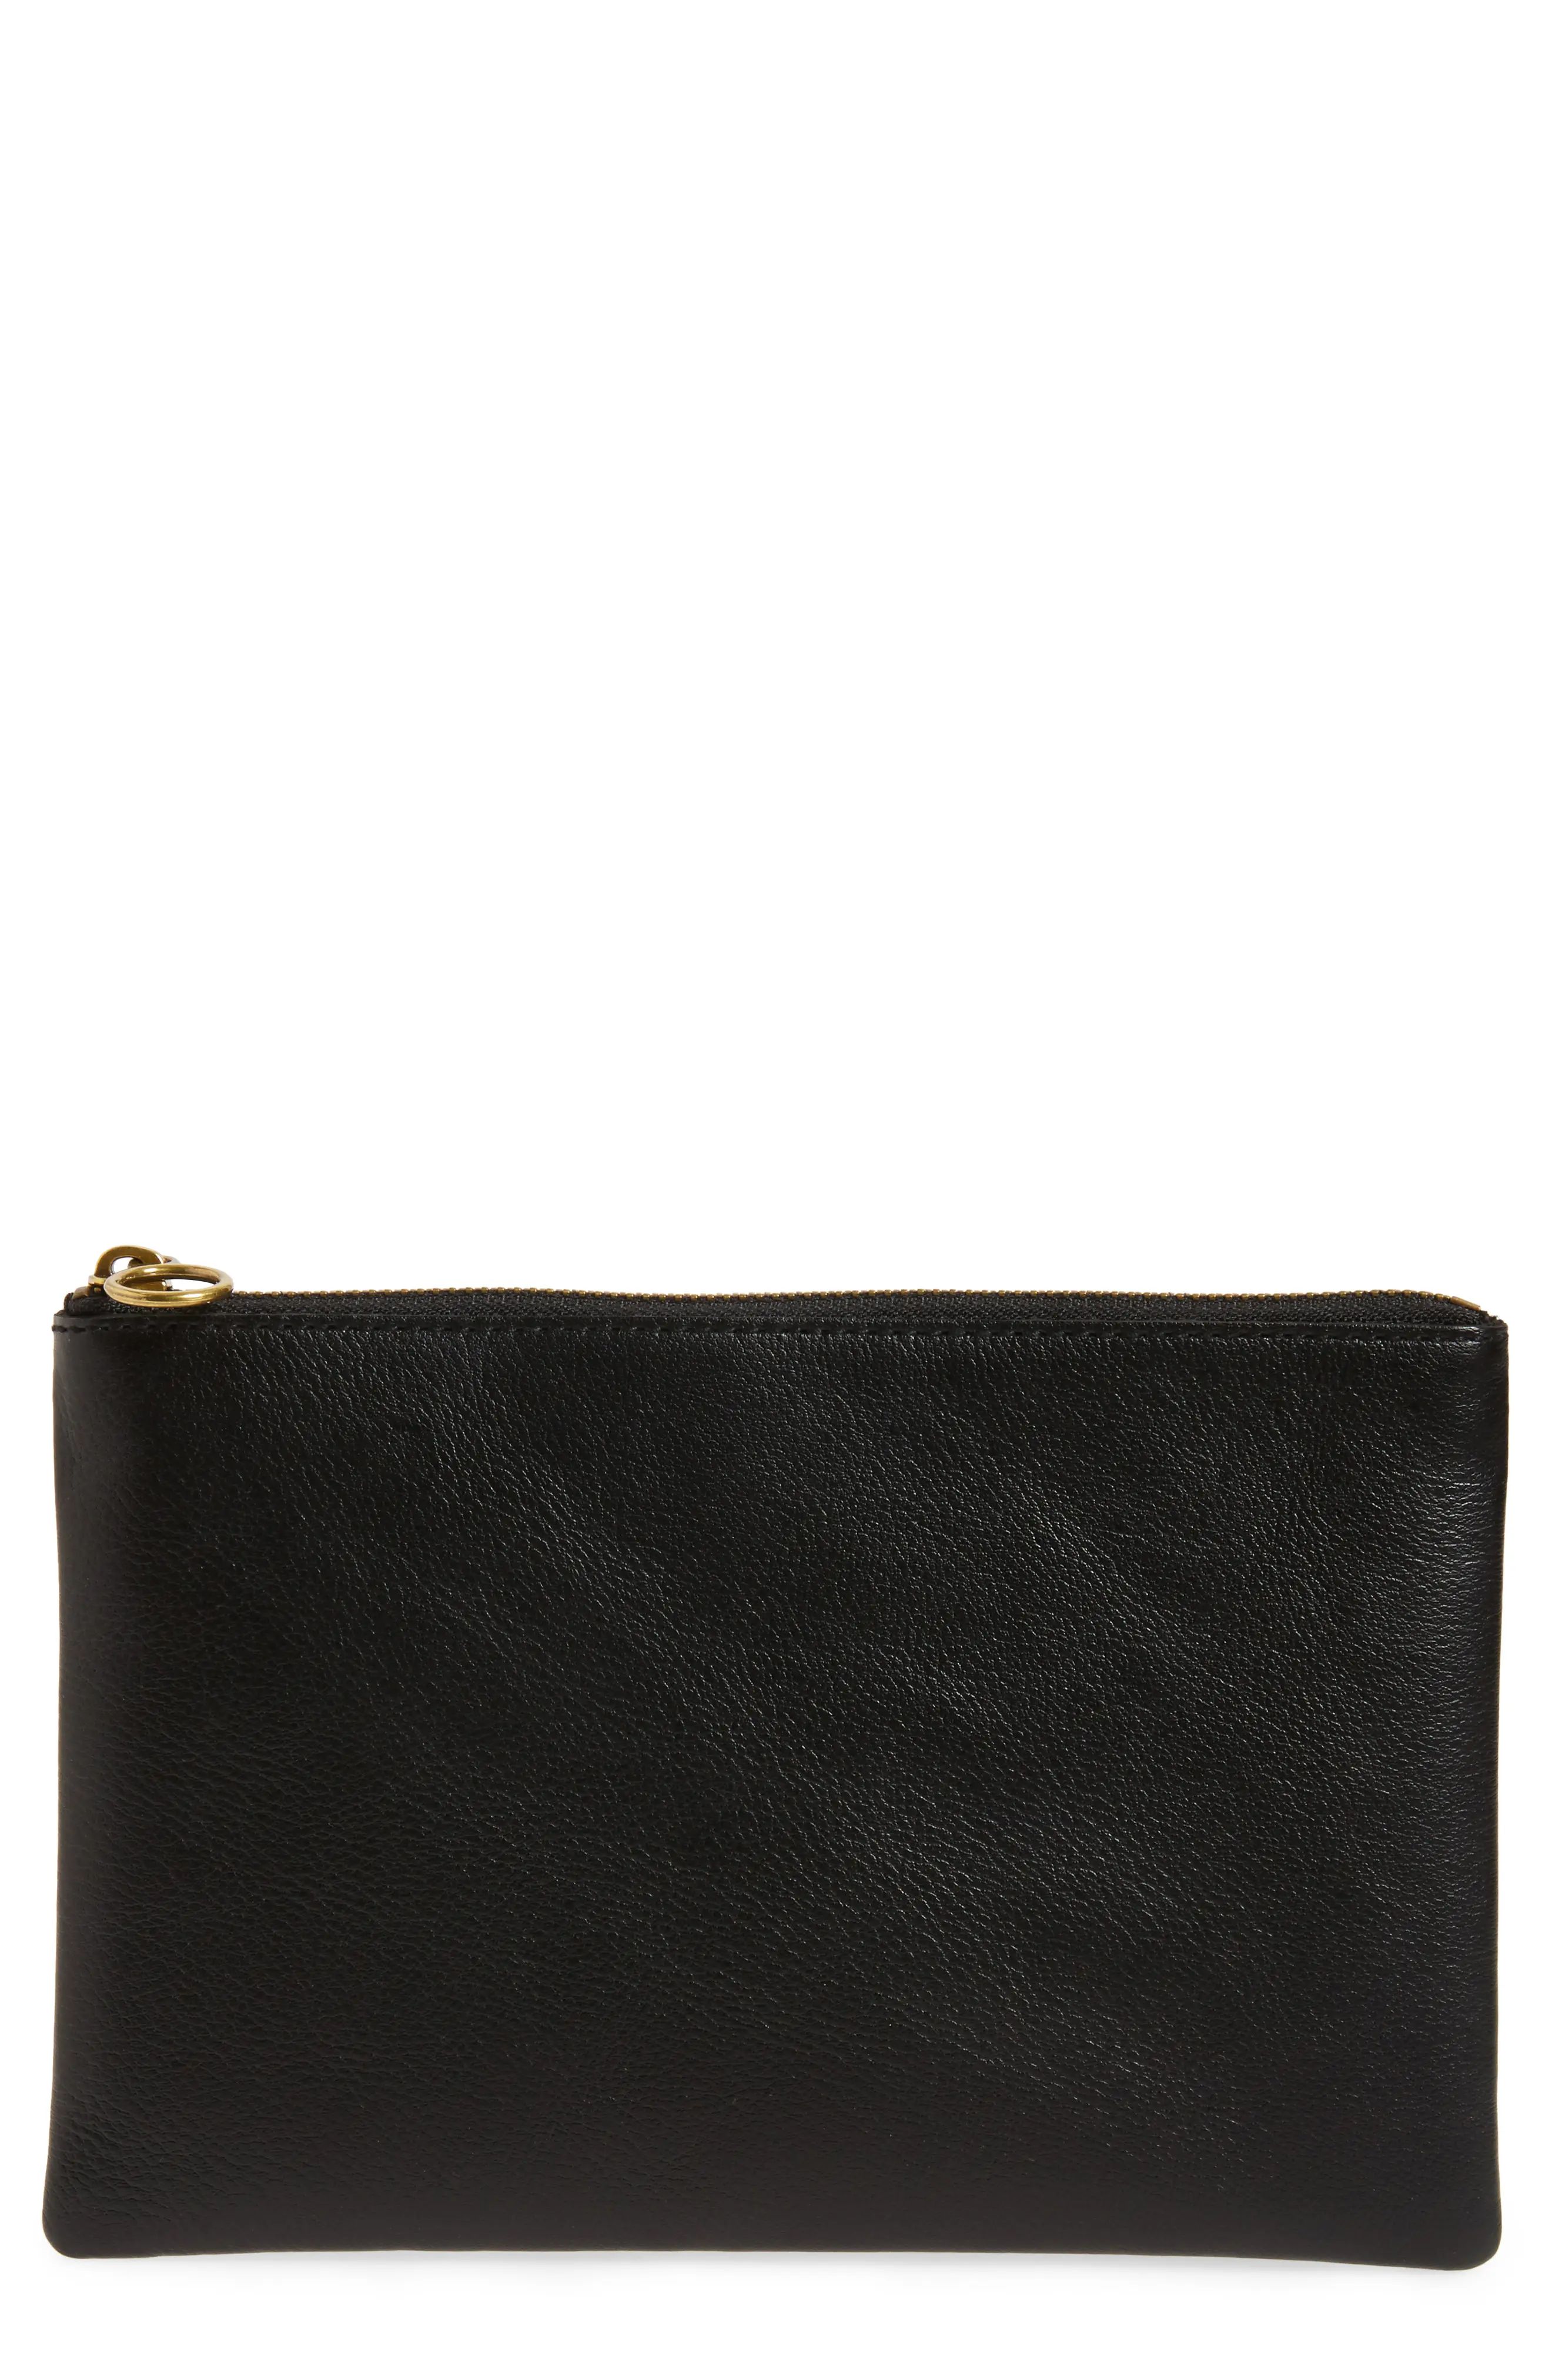 Madewell The Leather Pouch Clutch | Nordstrom